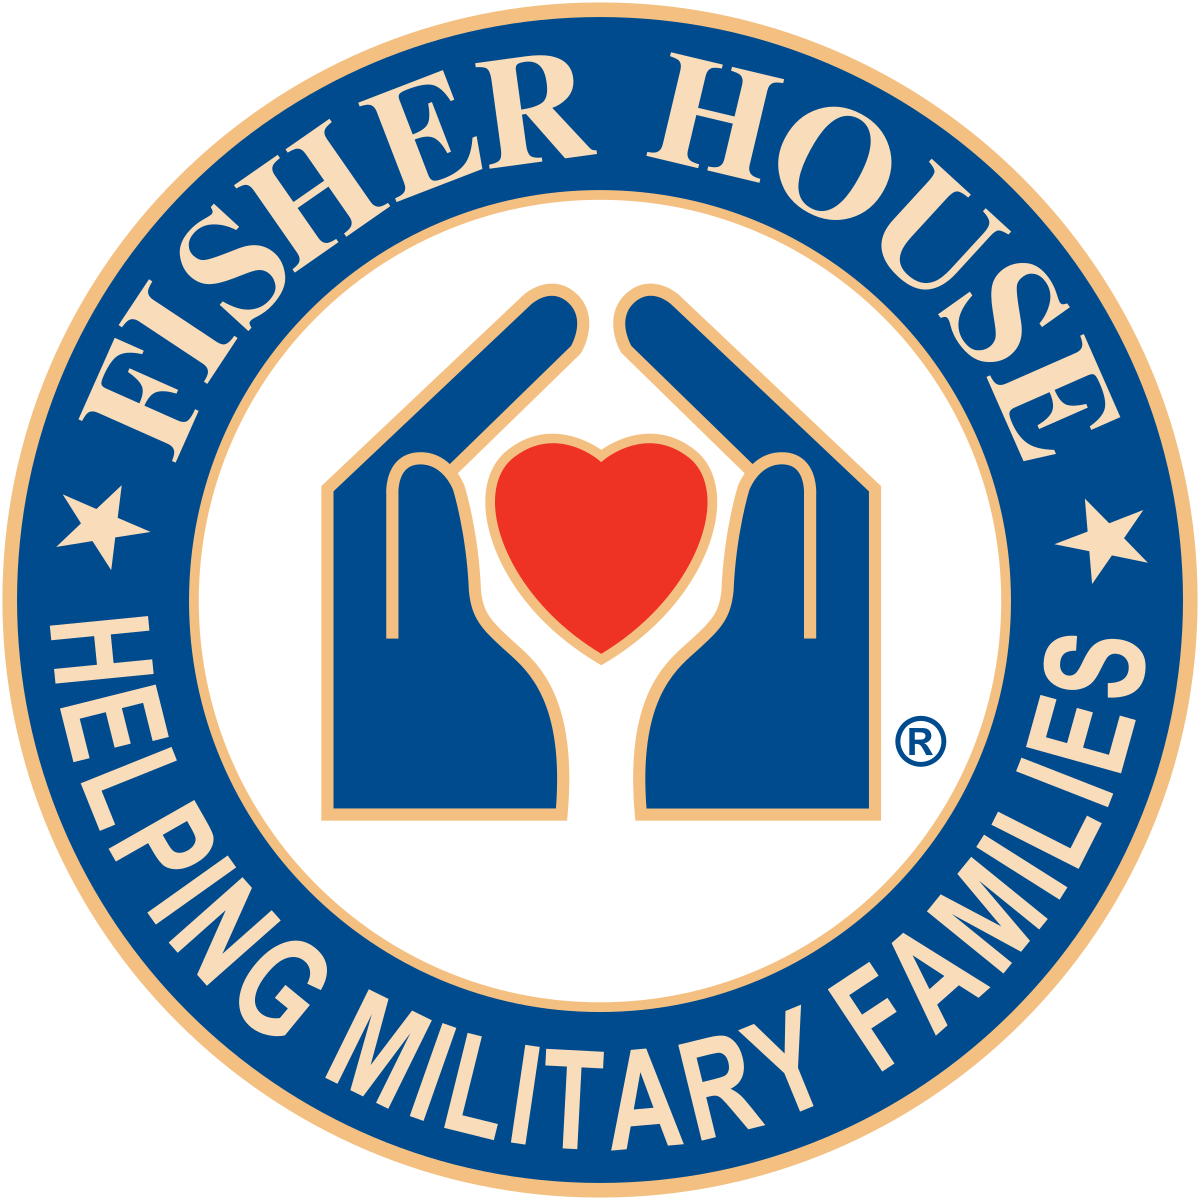 FISHER HOUSE FOUNDATION INC